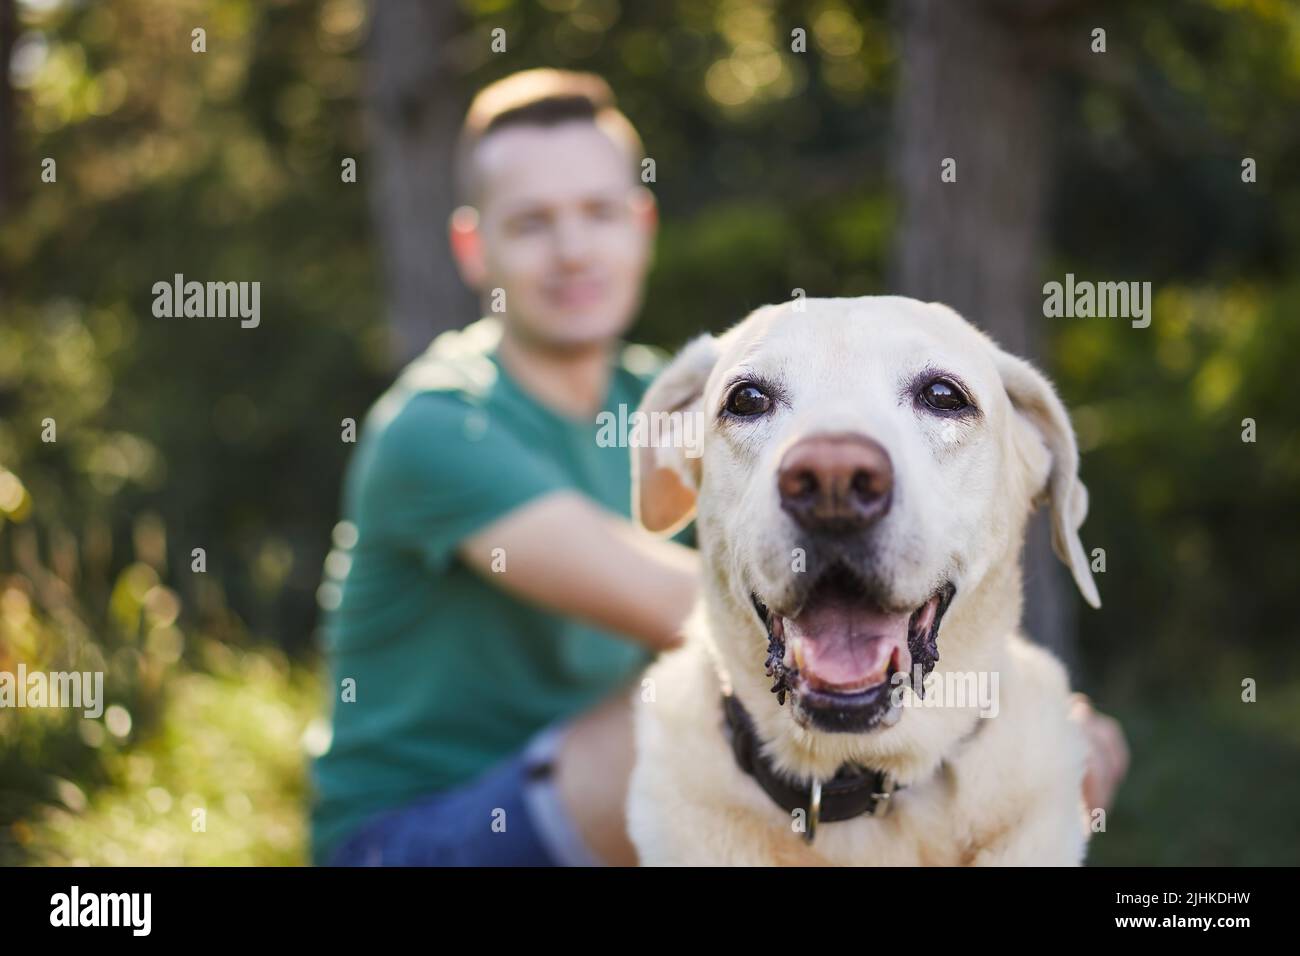 Selective focus on cute dog with his pet owner in background. Man and labrador retriever resting during sunny summer day. Stock Photo